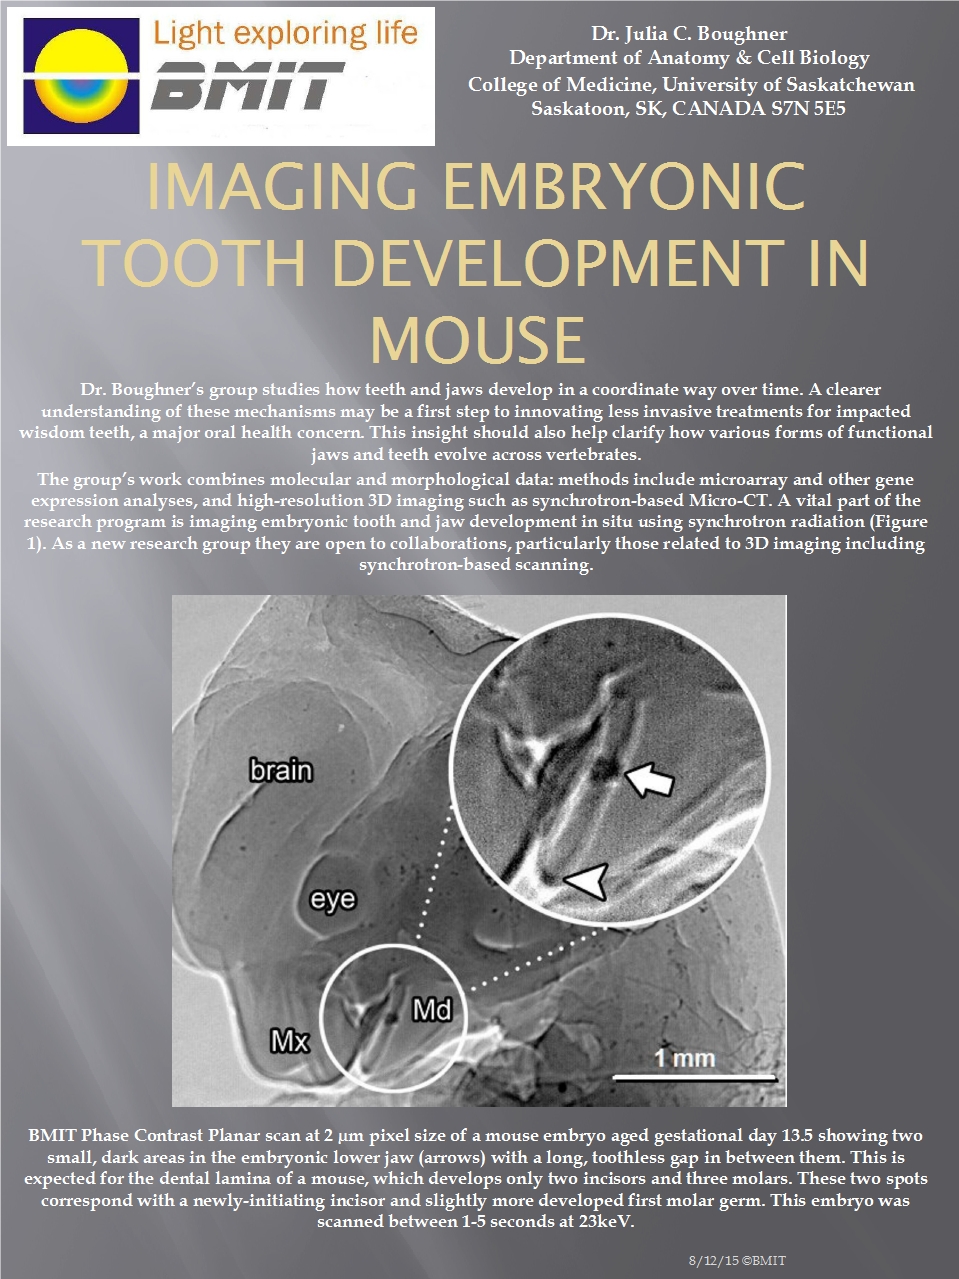 Imaging Embryonic Tooth Development in Mouse Image